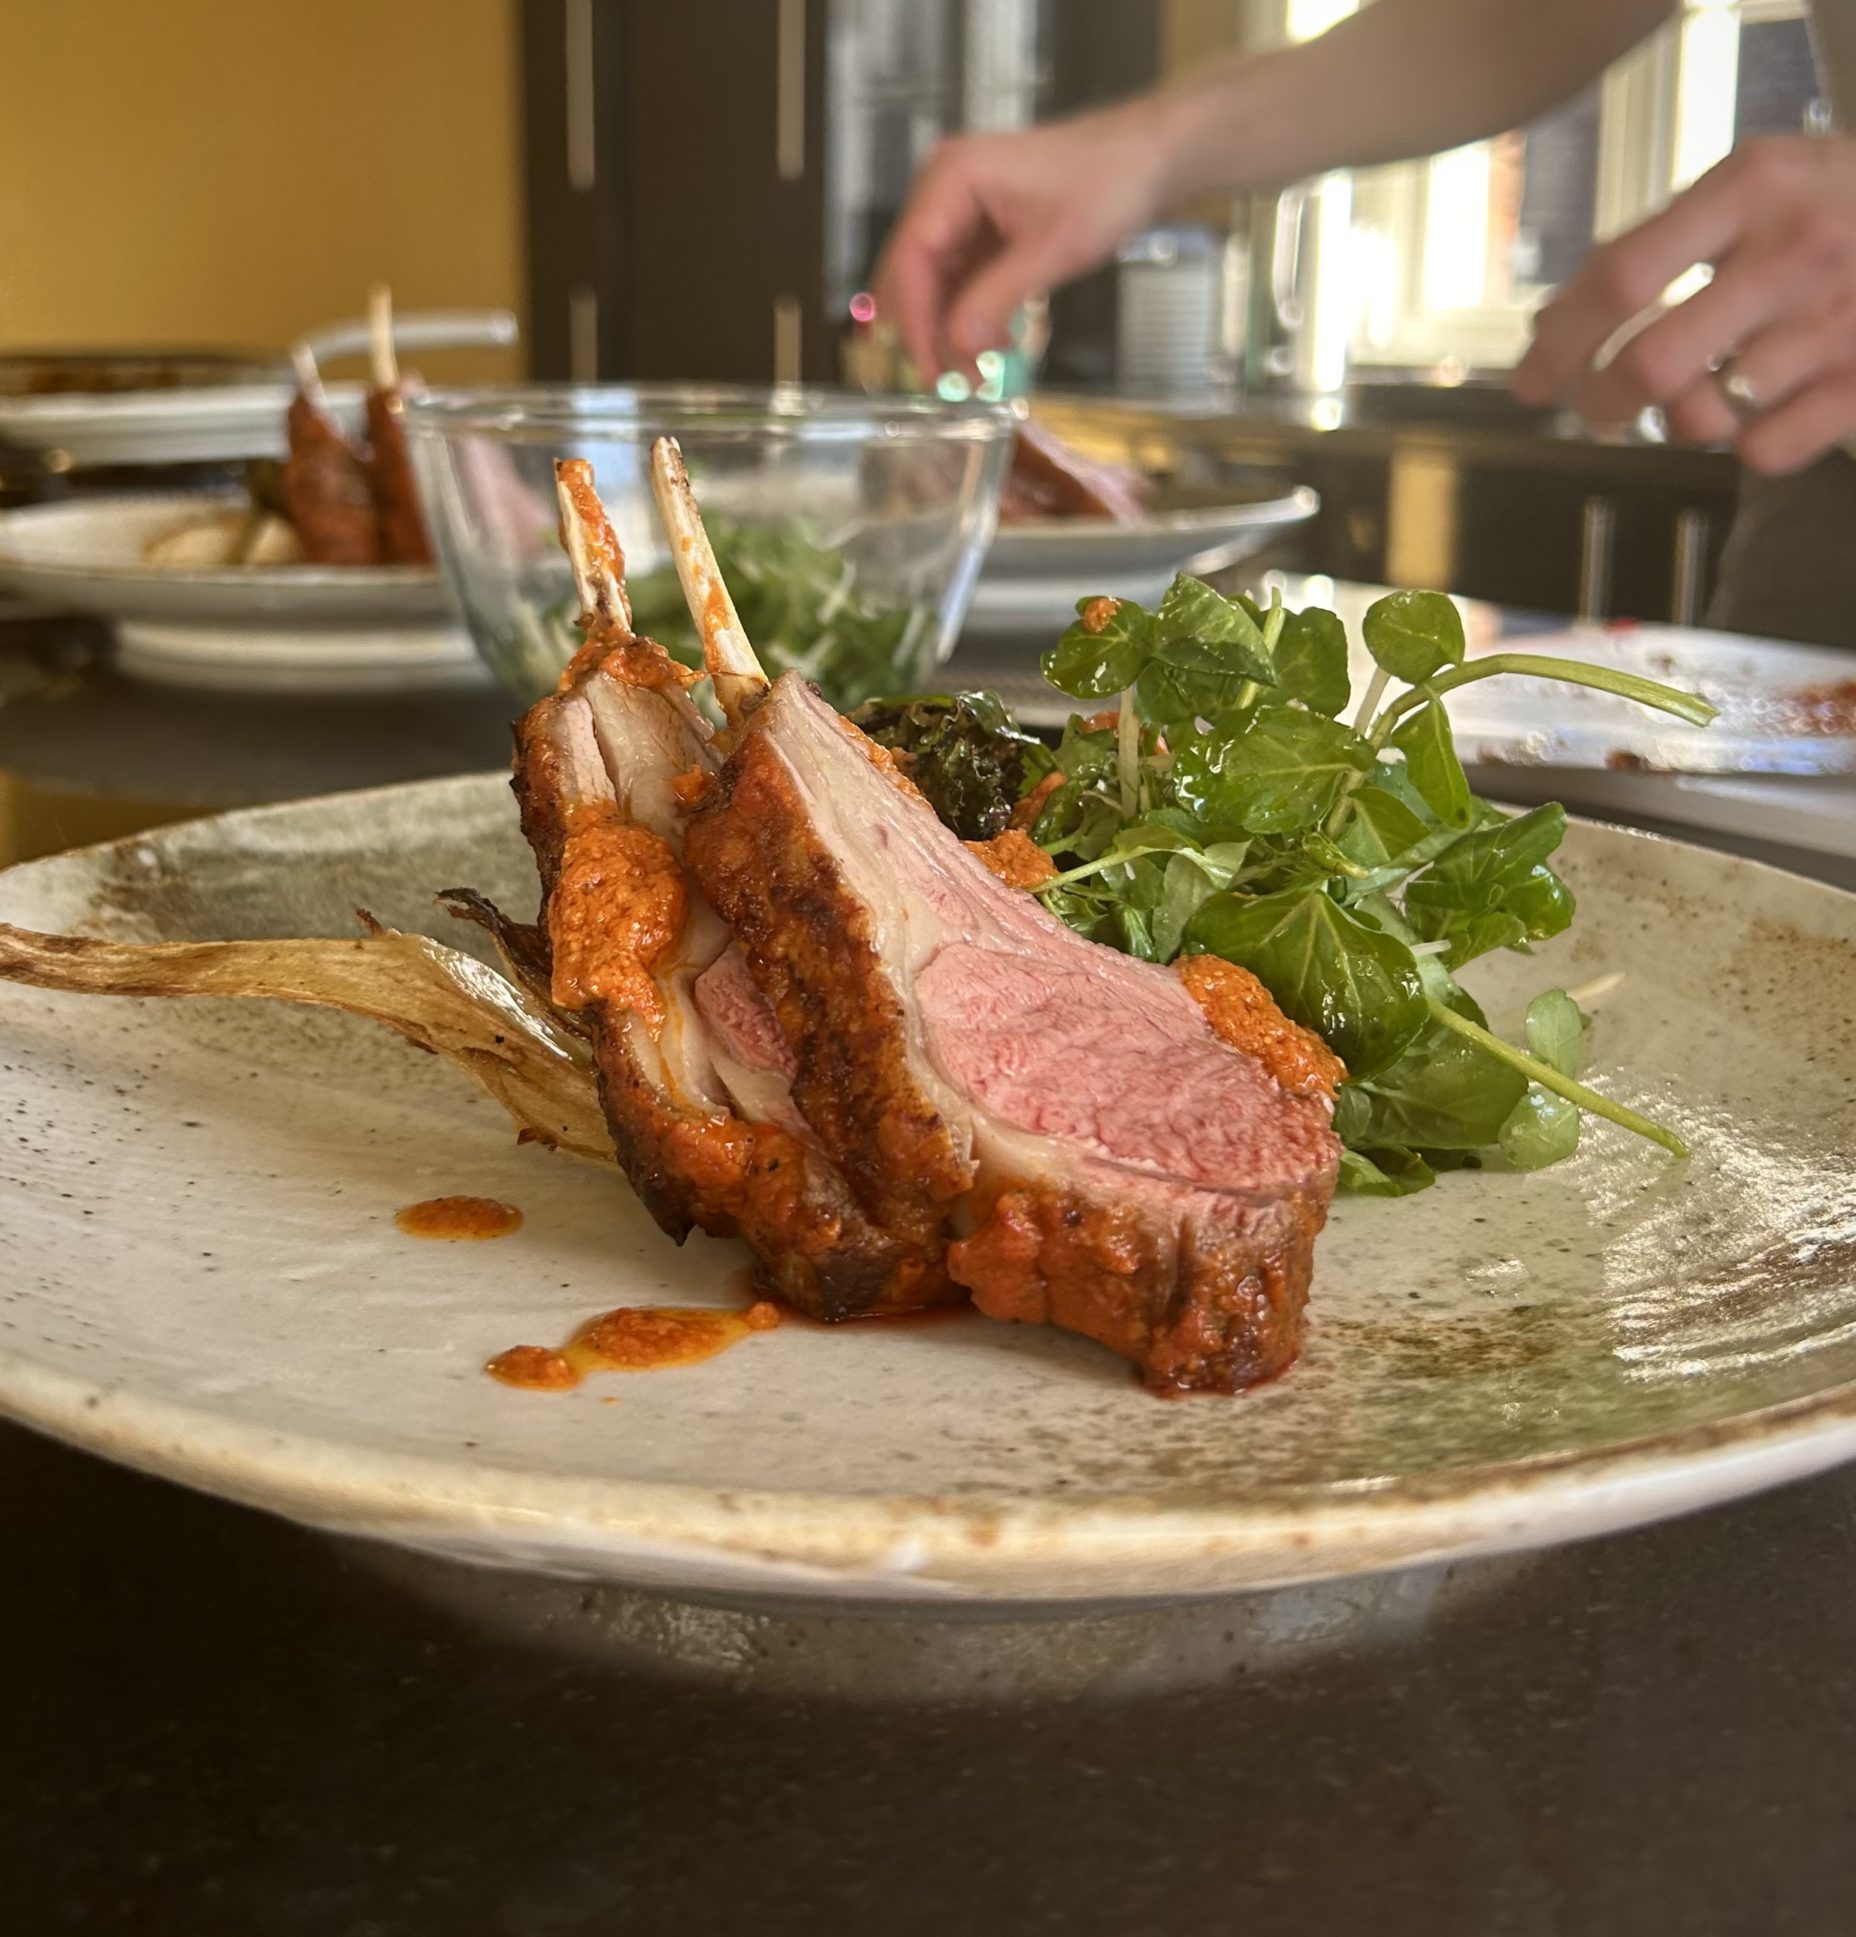 The d lamb rack, celeriac, fennel, roasted red pepper dip and watercress salad